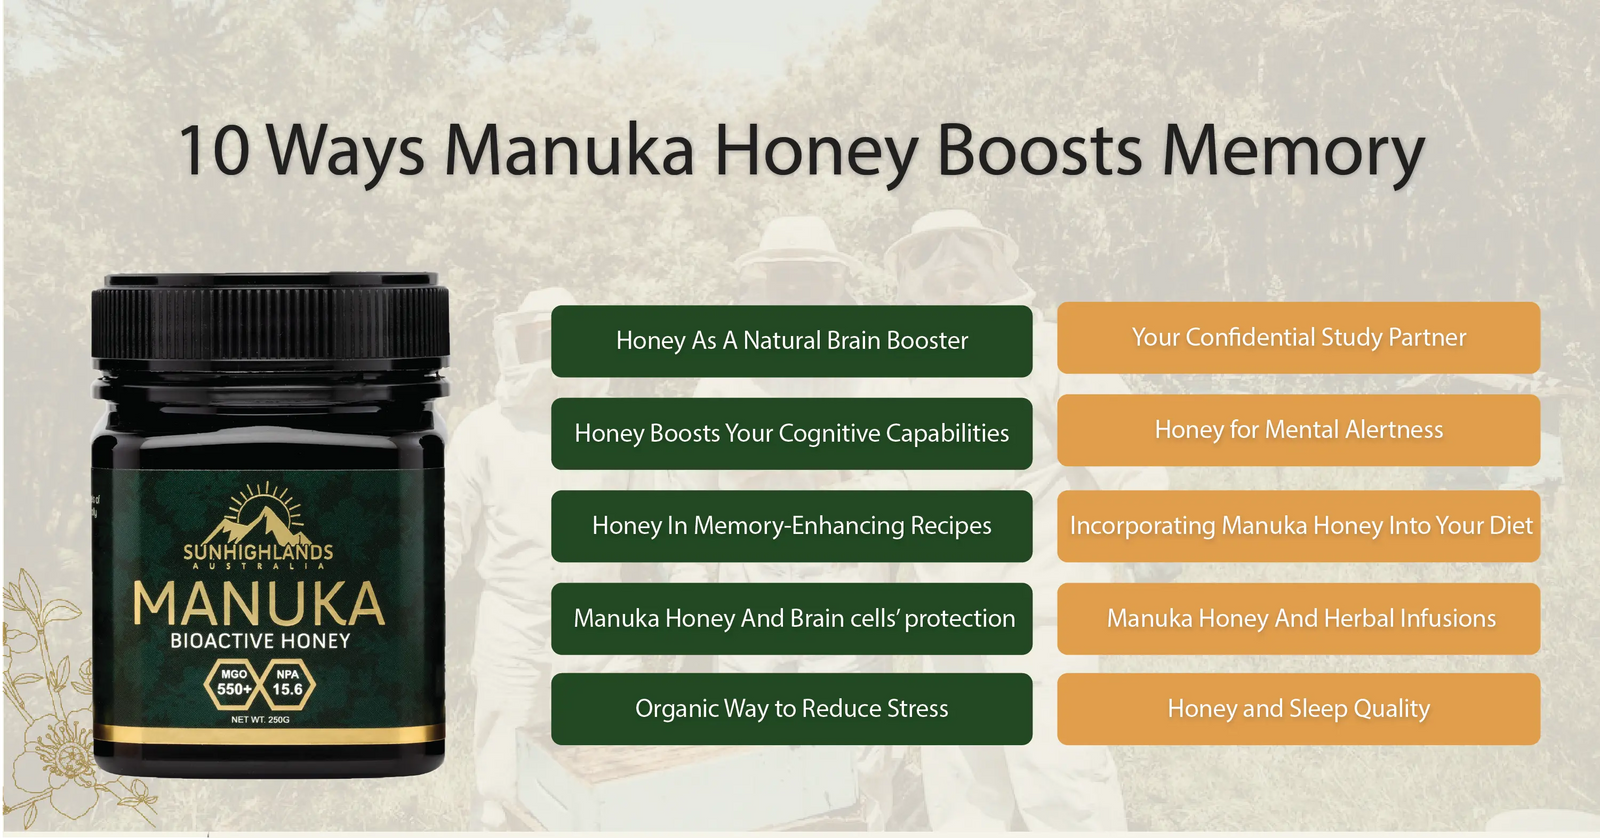 10 Ways To Manuka Honey Can Boost Your Memory